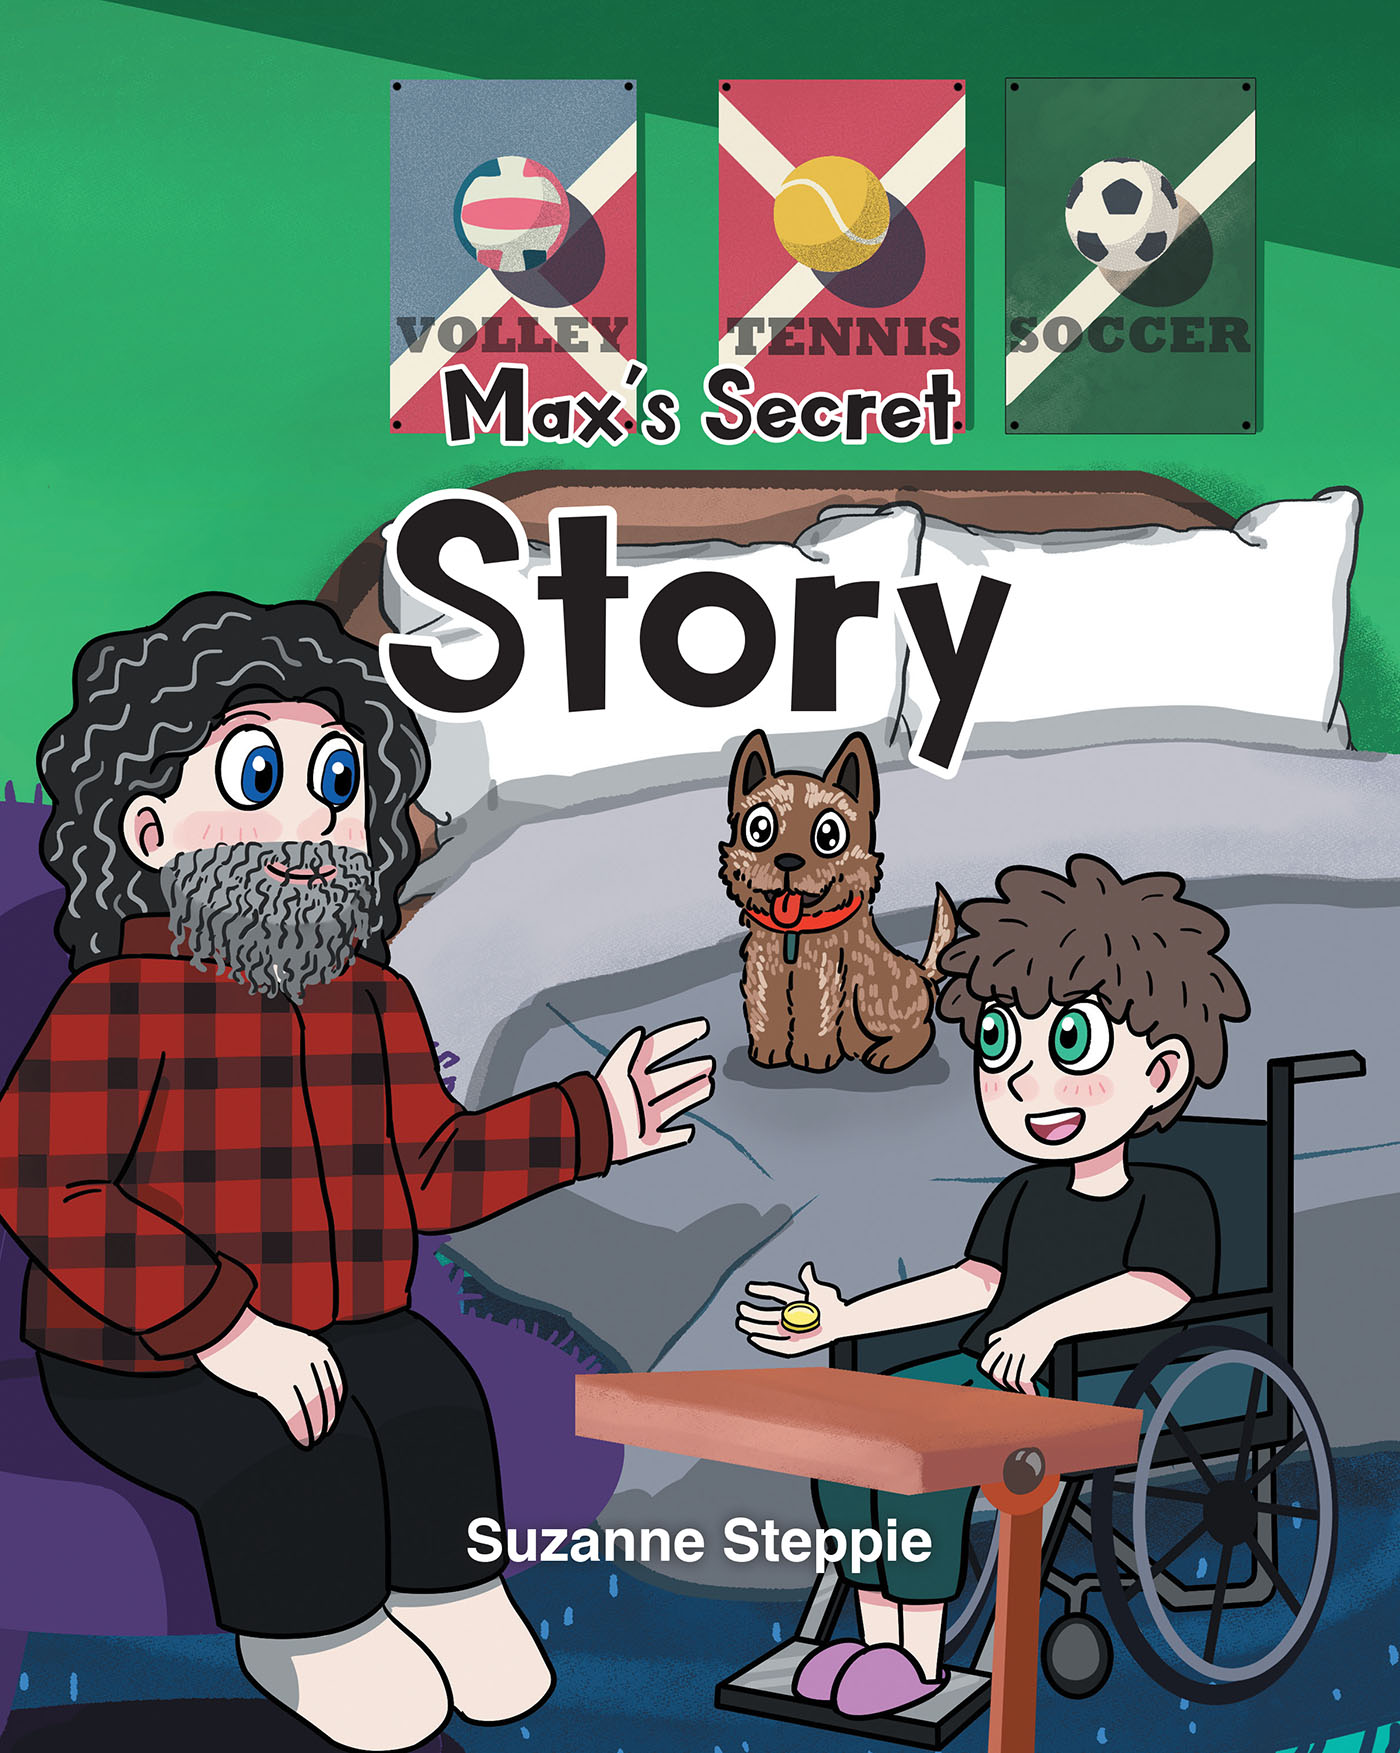 Suzanne Steppie’s Newly Released "Max’s Secret Story" is an Enjoyable and Uplifting Message of God’s Unending Love